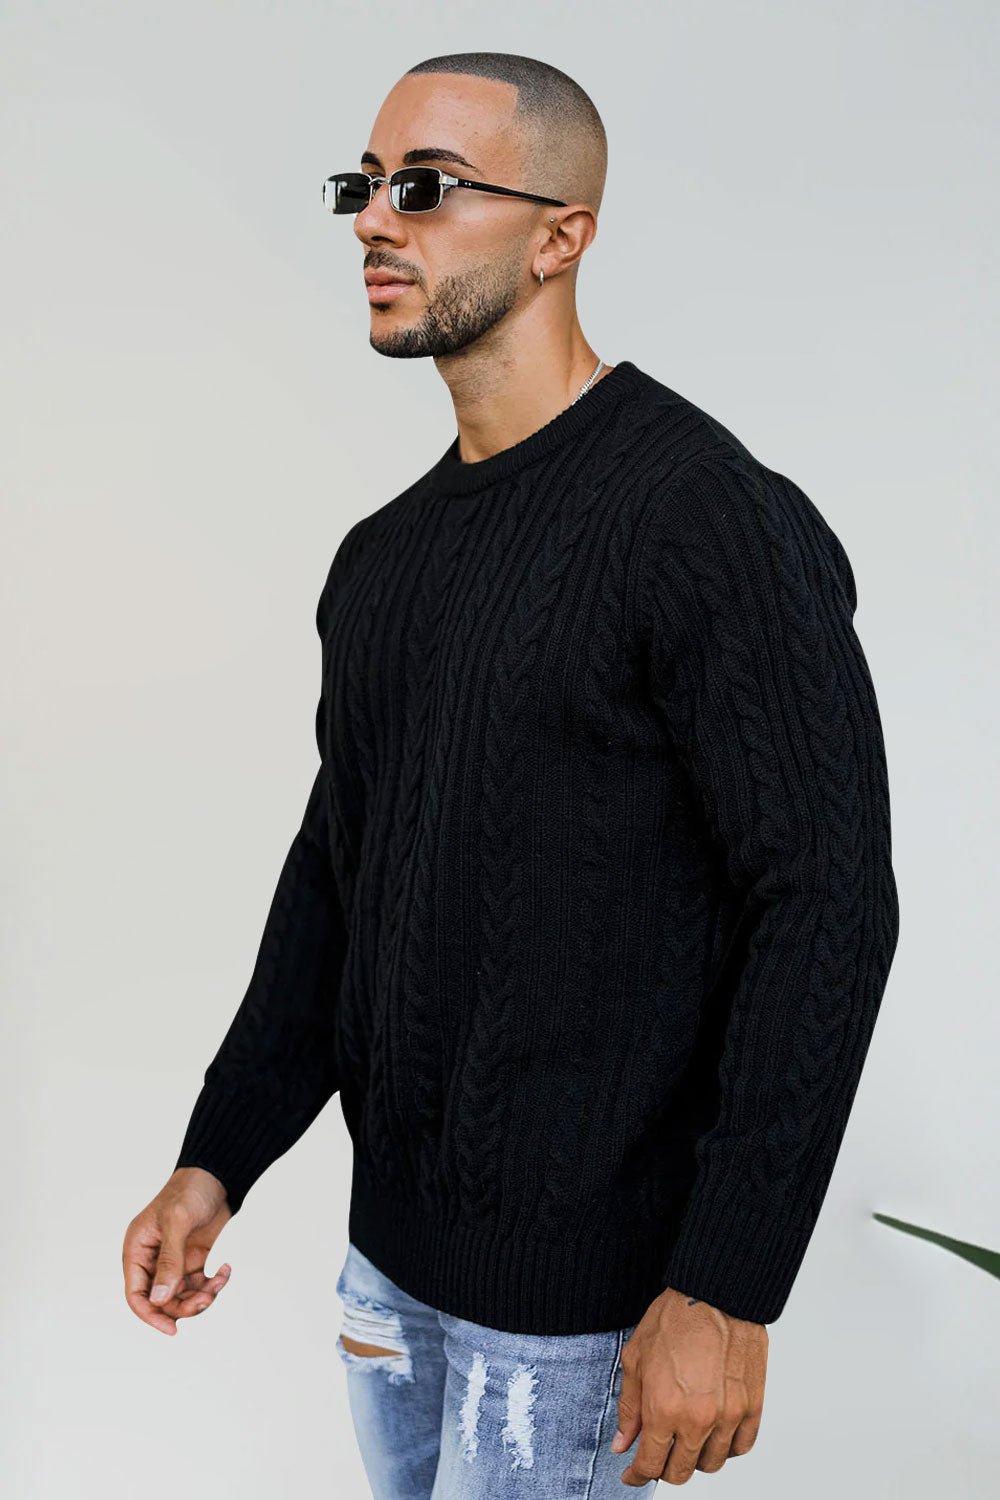 Gingtto Mens Black Winter Sweaters: Classic Comfort, Modern Style